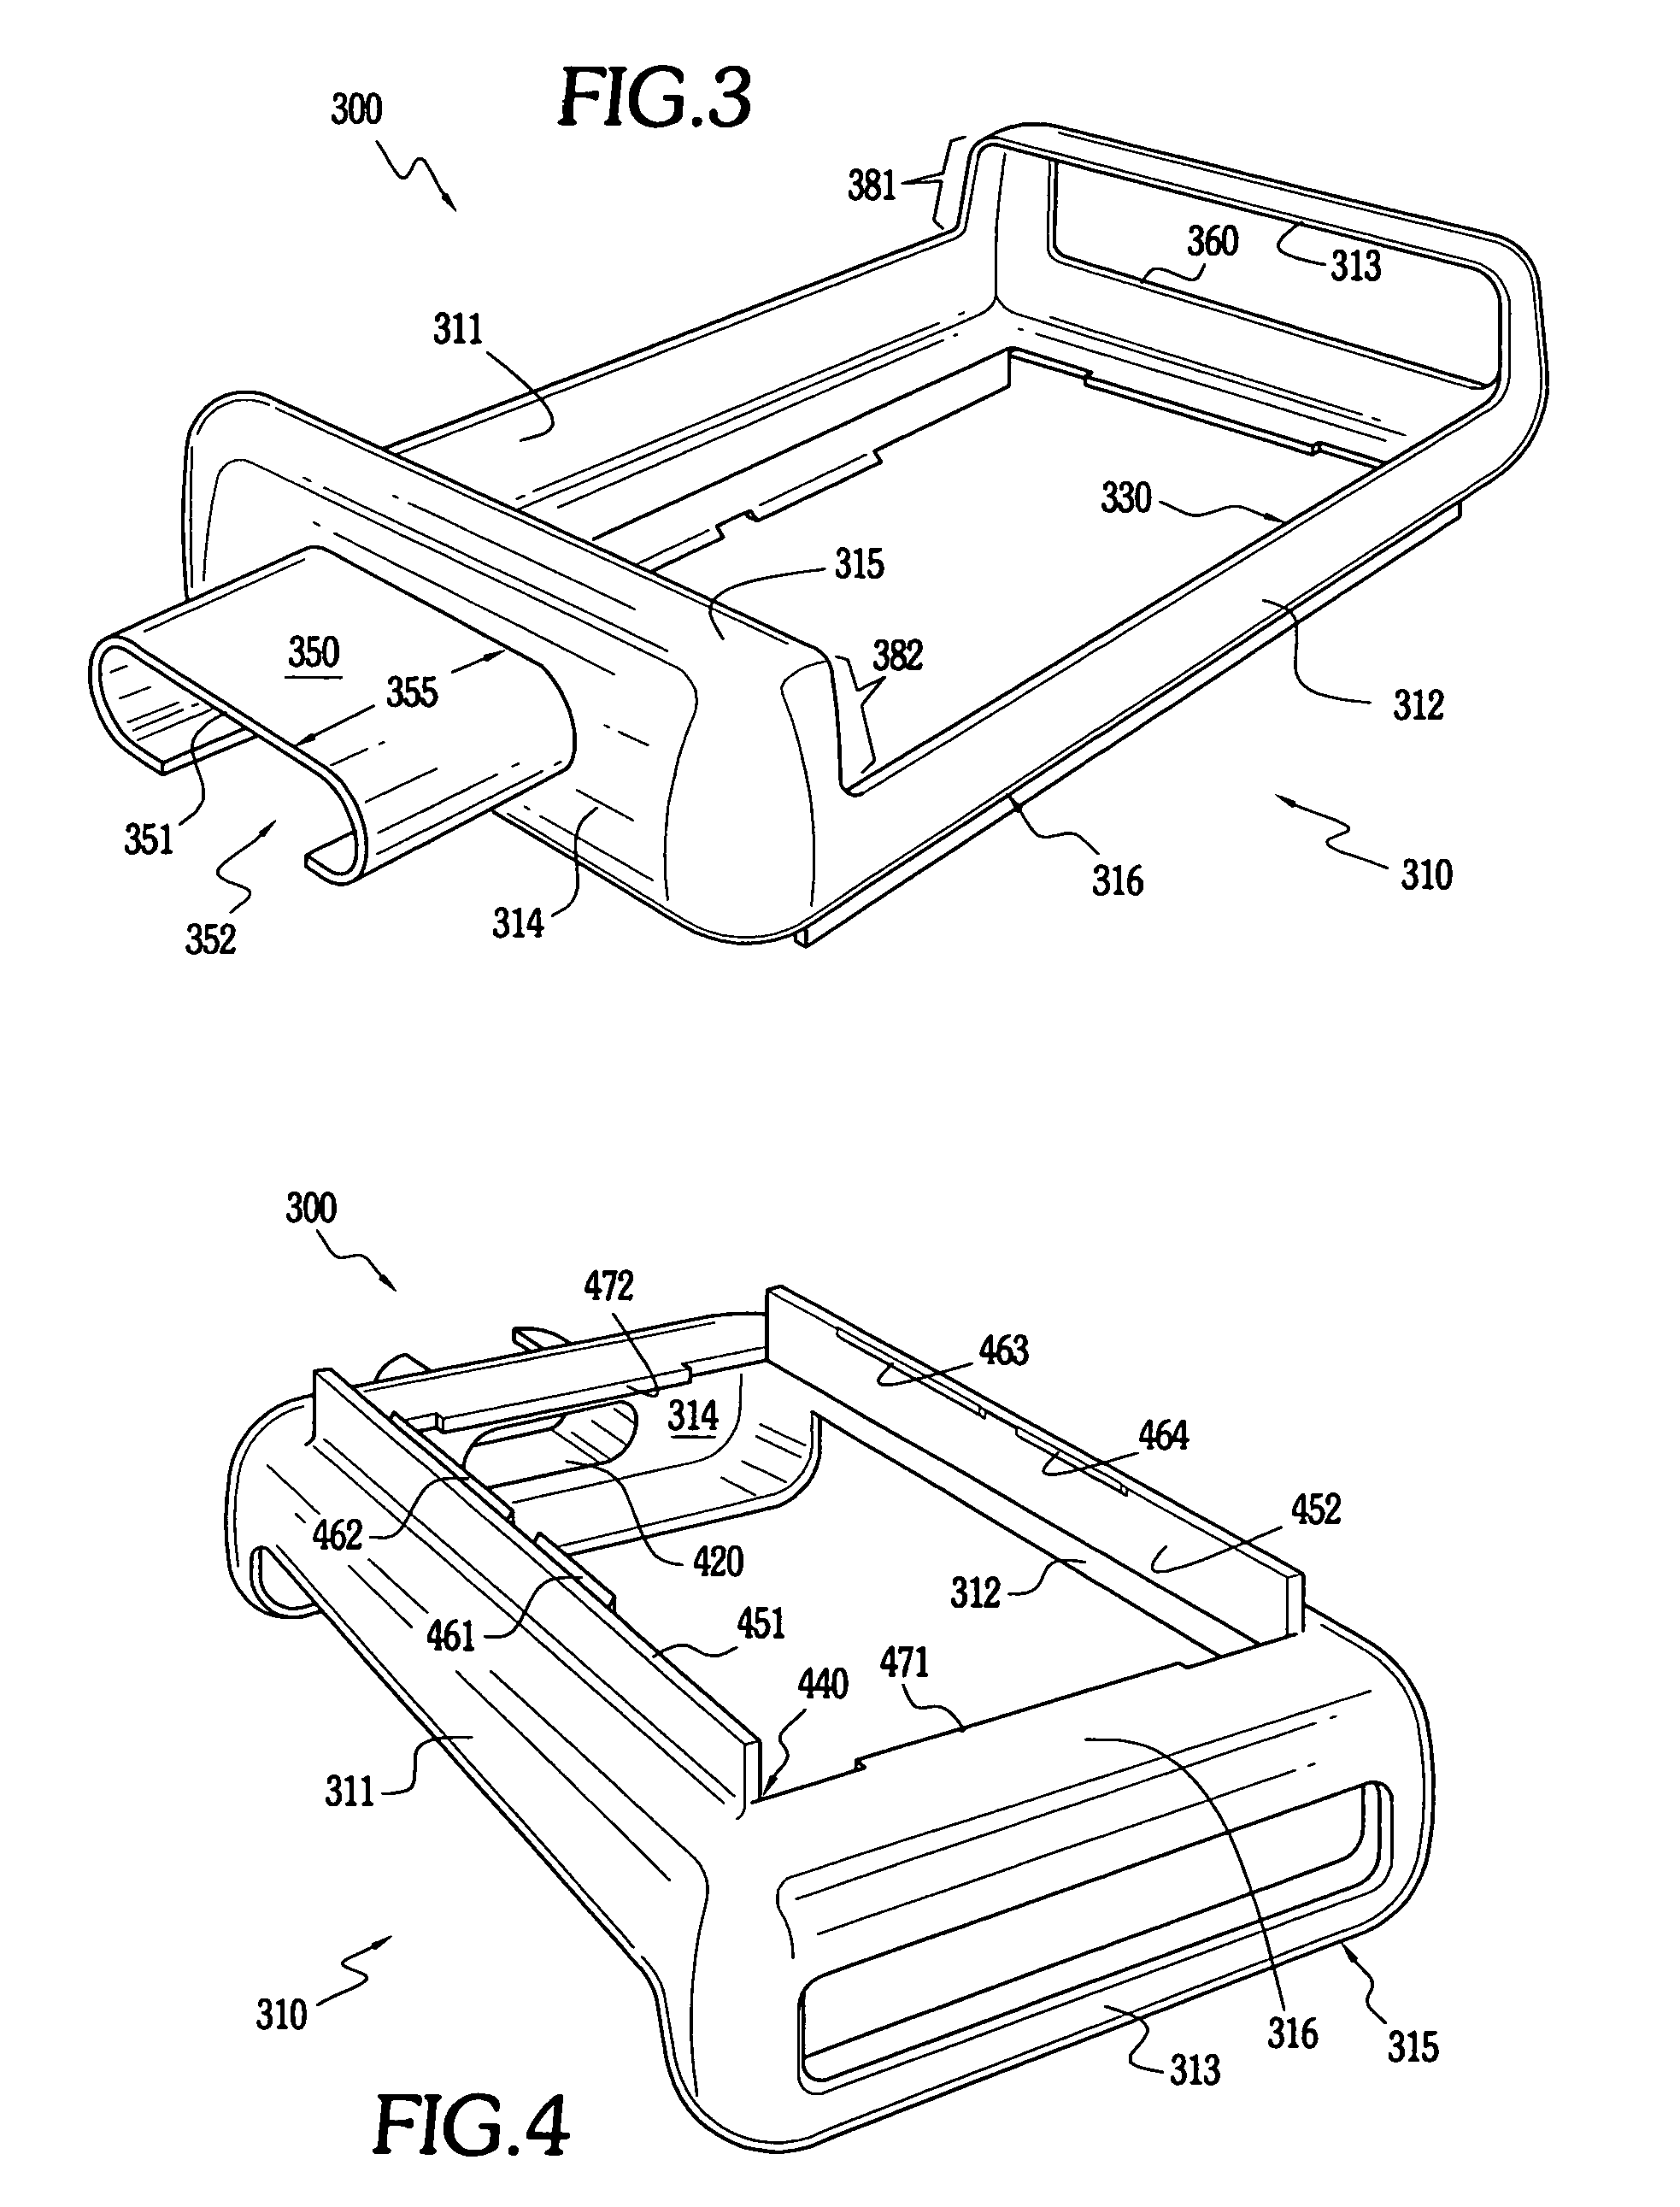 Power supply system comprising rechargeable battery pack and attachment apparatus